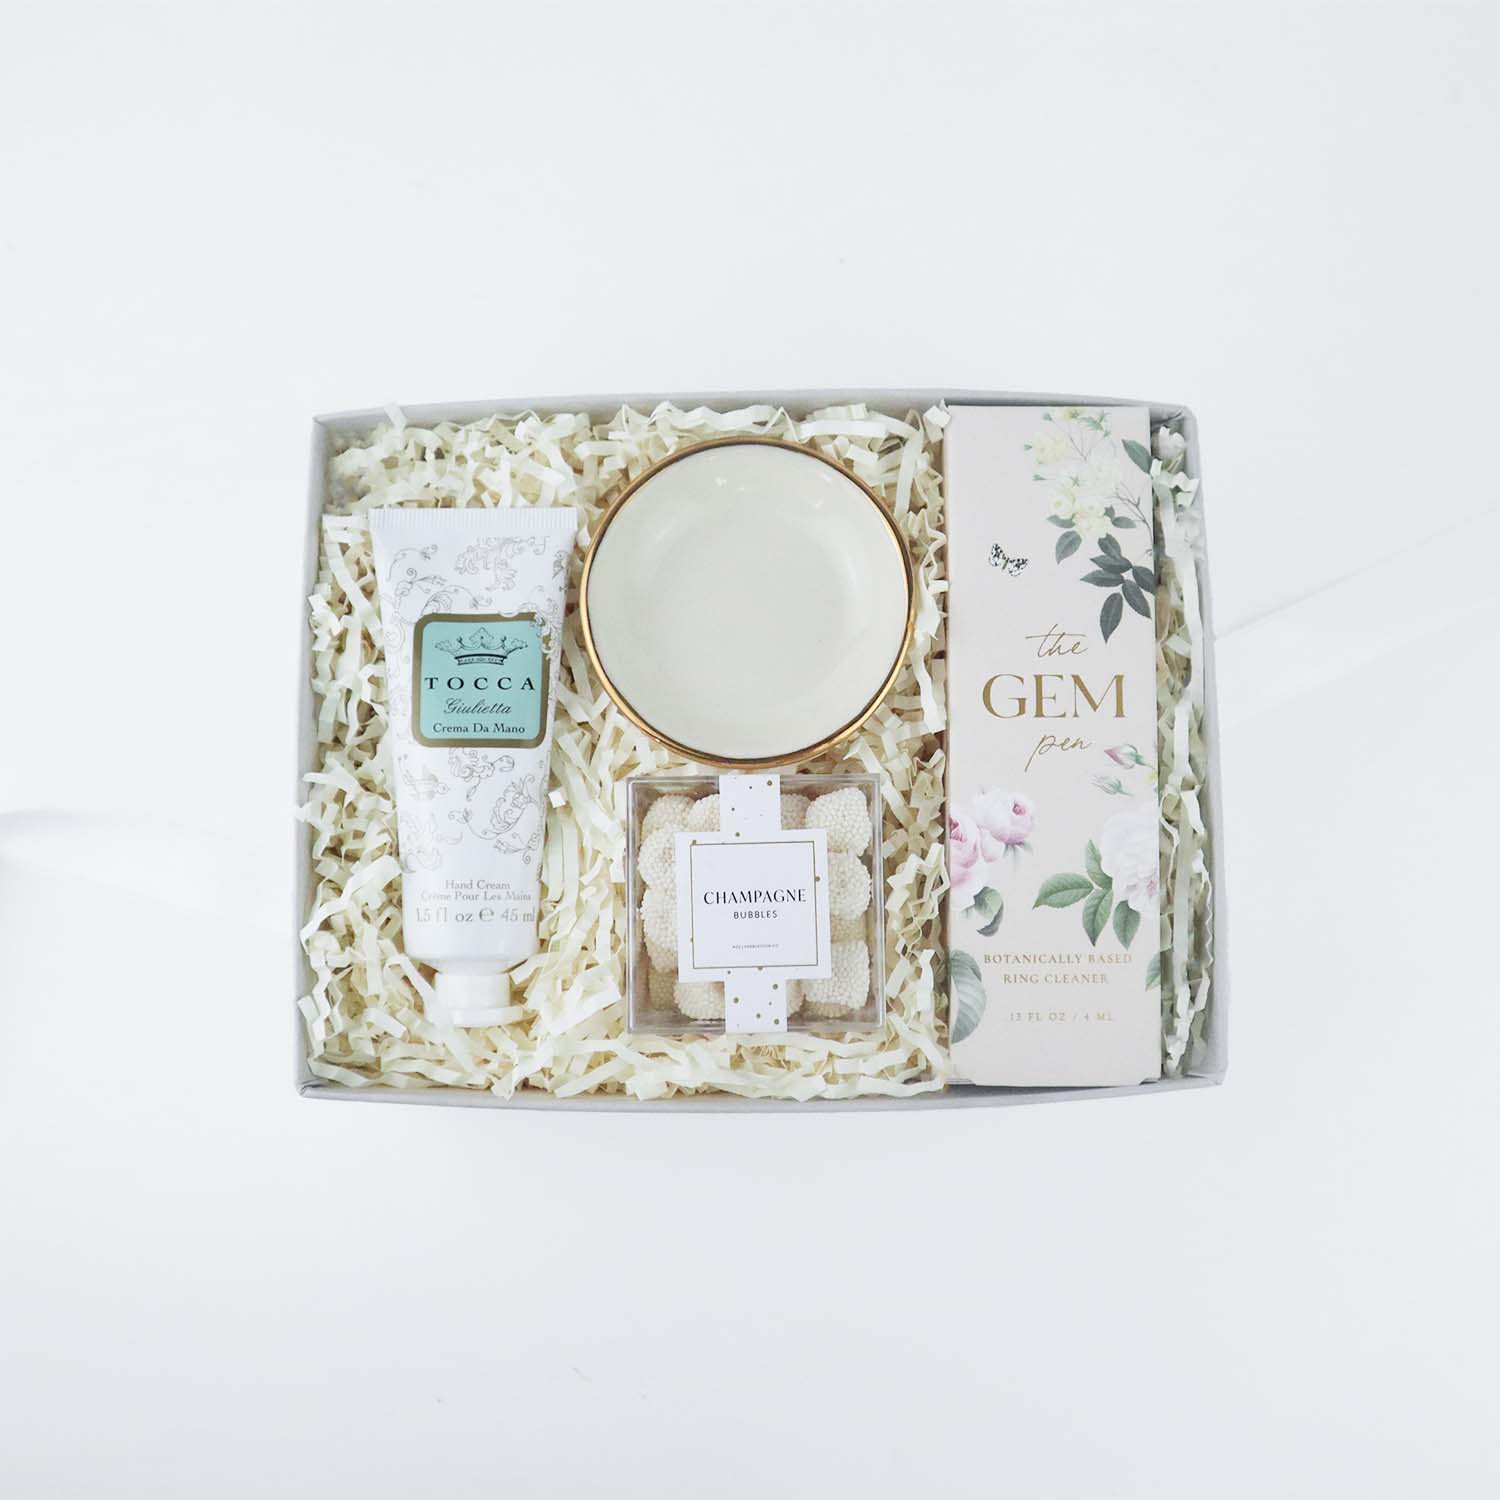 Light grey box containing a small, white ceramic ring dish with gold rim, floral filigree tube of Tocca Giullietta hand cream, white "Gem Pen" with floral design and matching box, clear plastic "champagne bubbles" cube containing gummy drops covered with white non-pareils. 